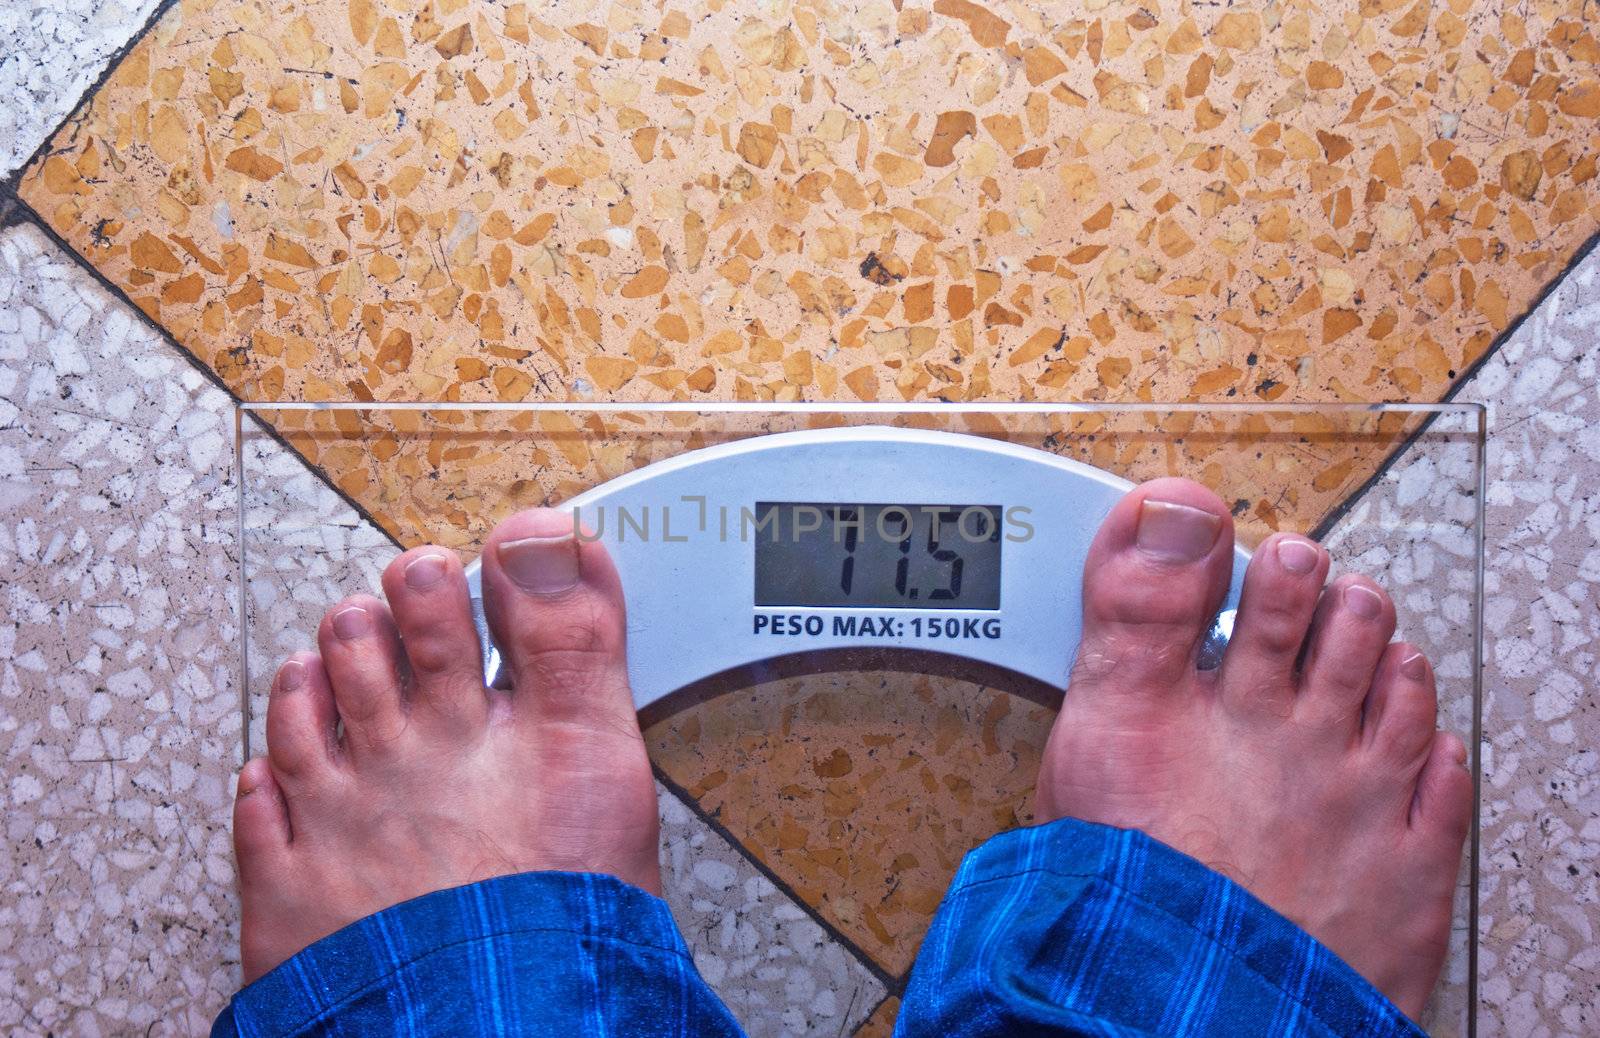 A scale with two feet of the person standing on it